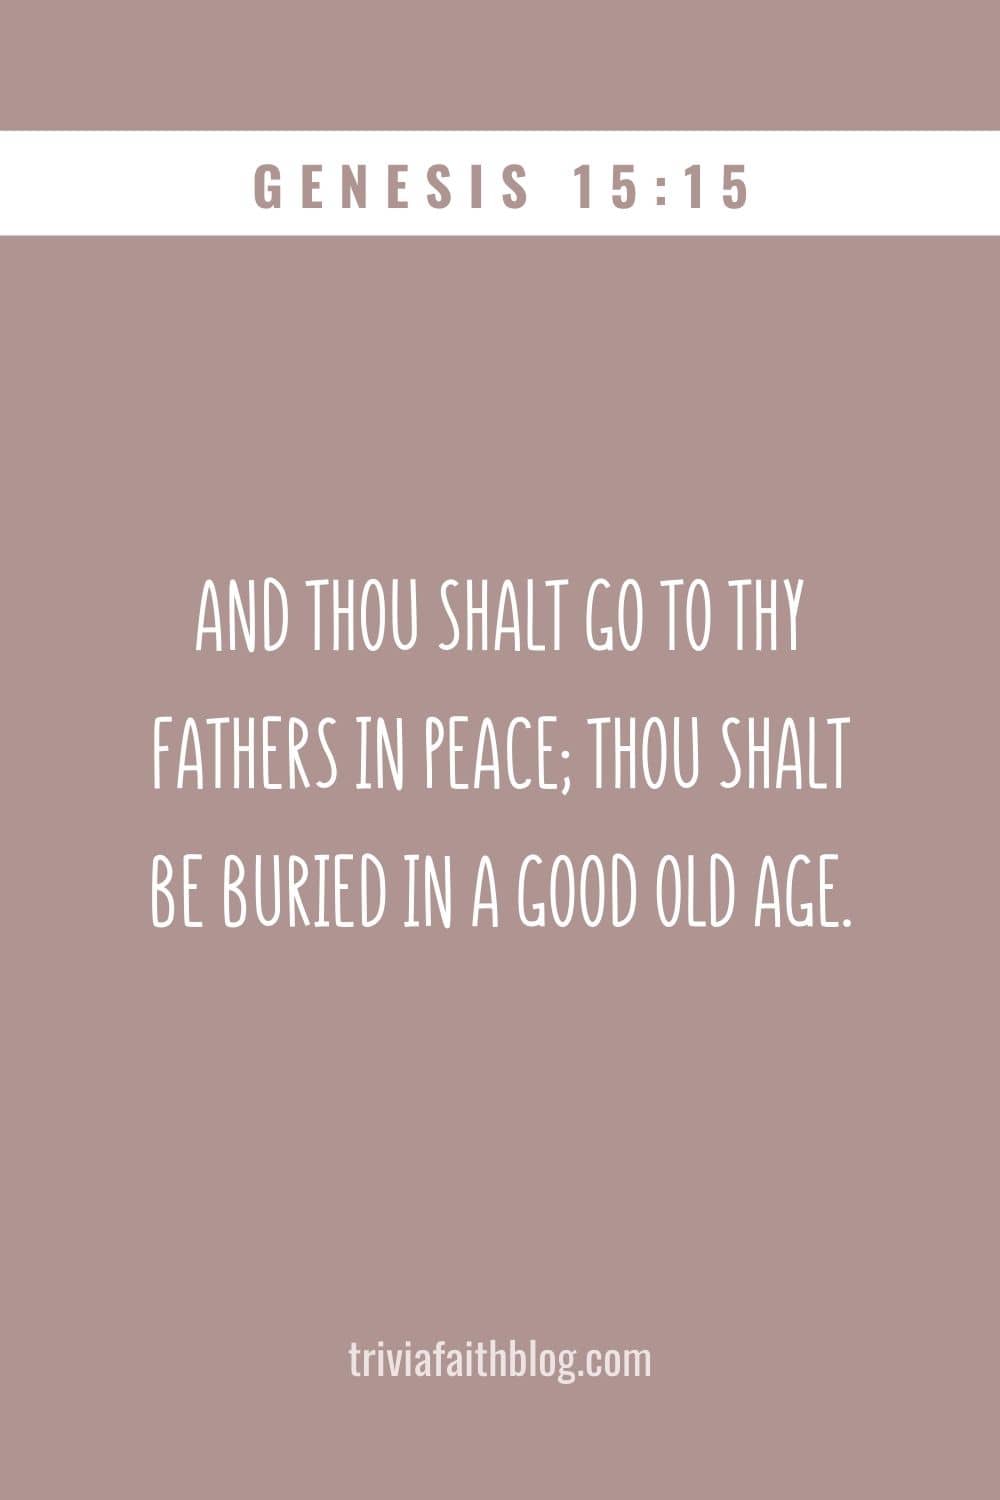 And thou shalt go to thy fathers in peace; thou shalt be buried in a good old age